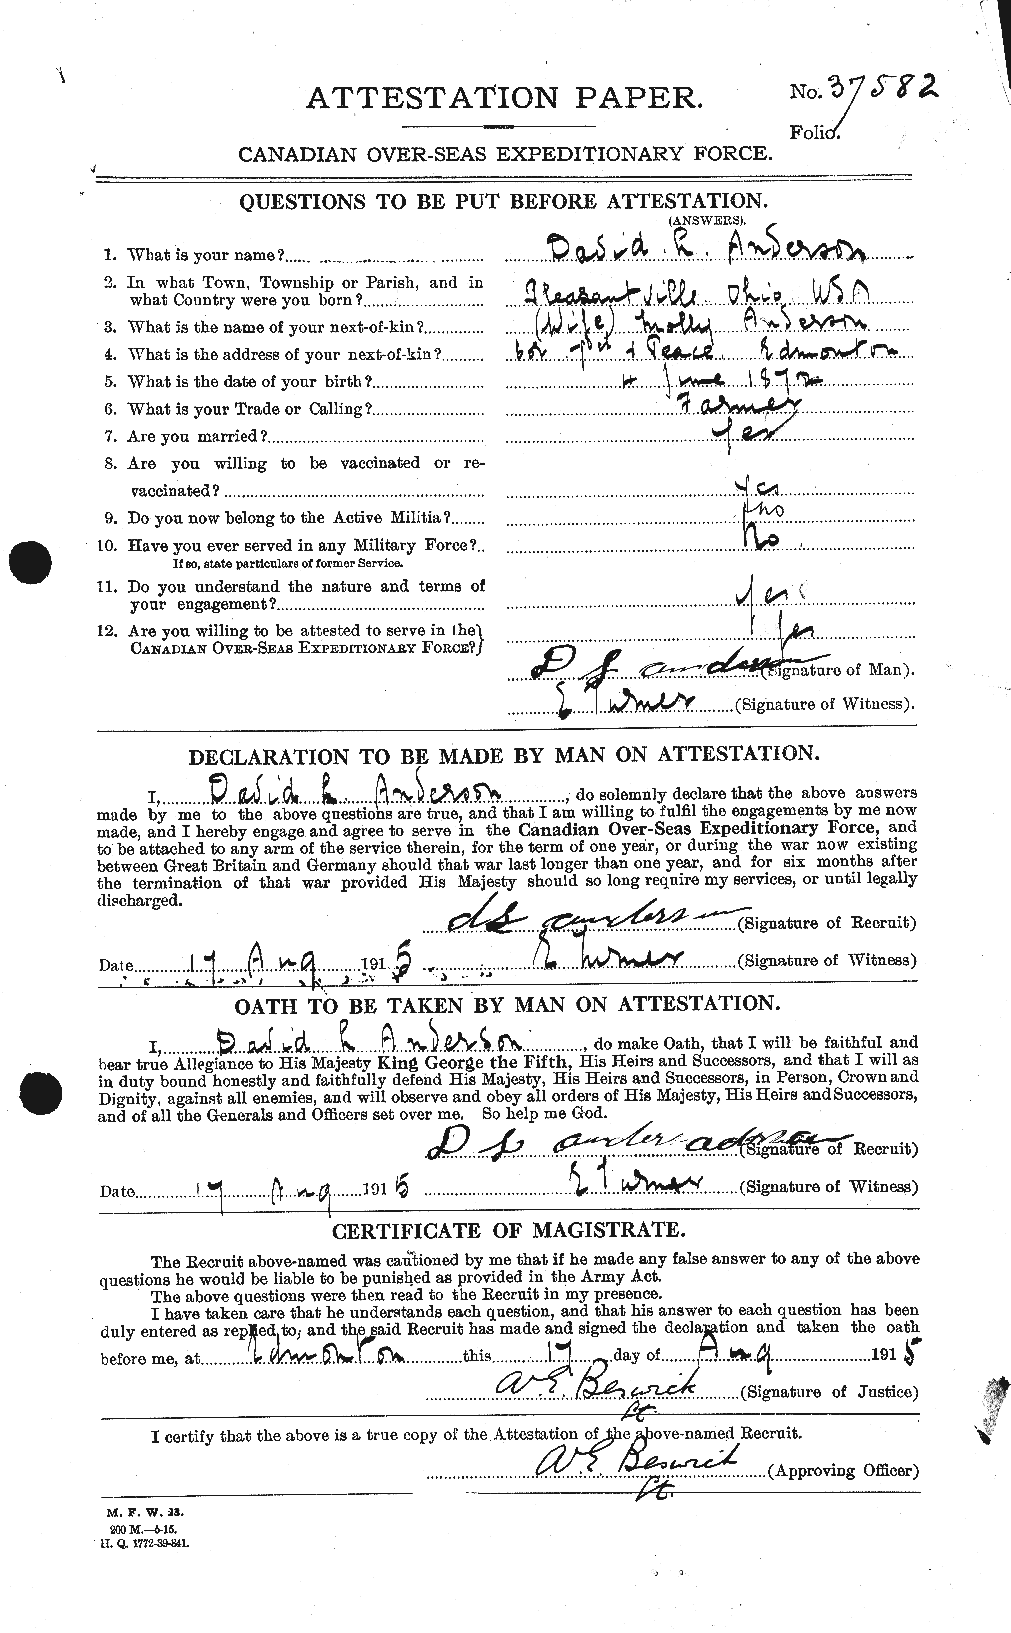 Personnel Records of the First World War - CEF 210009a